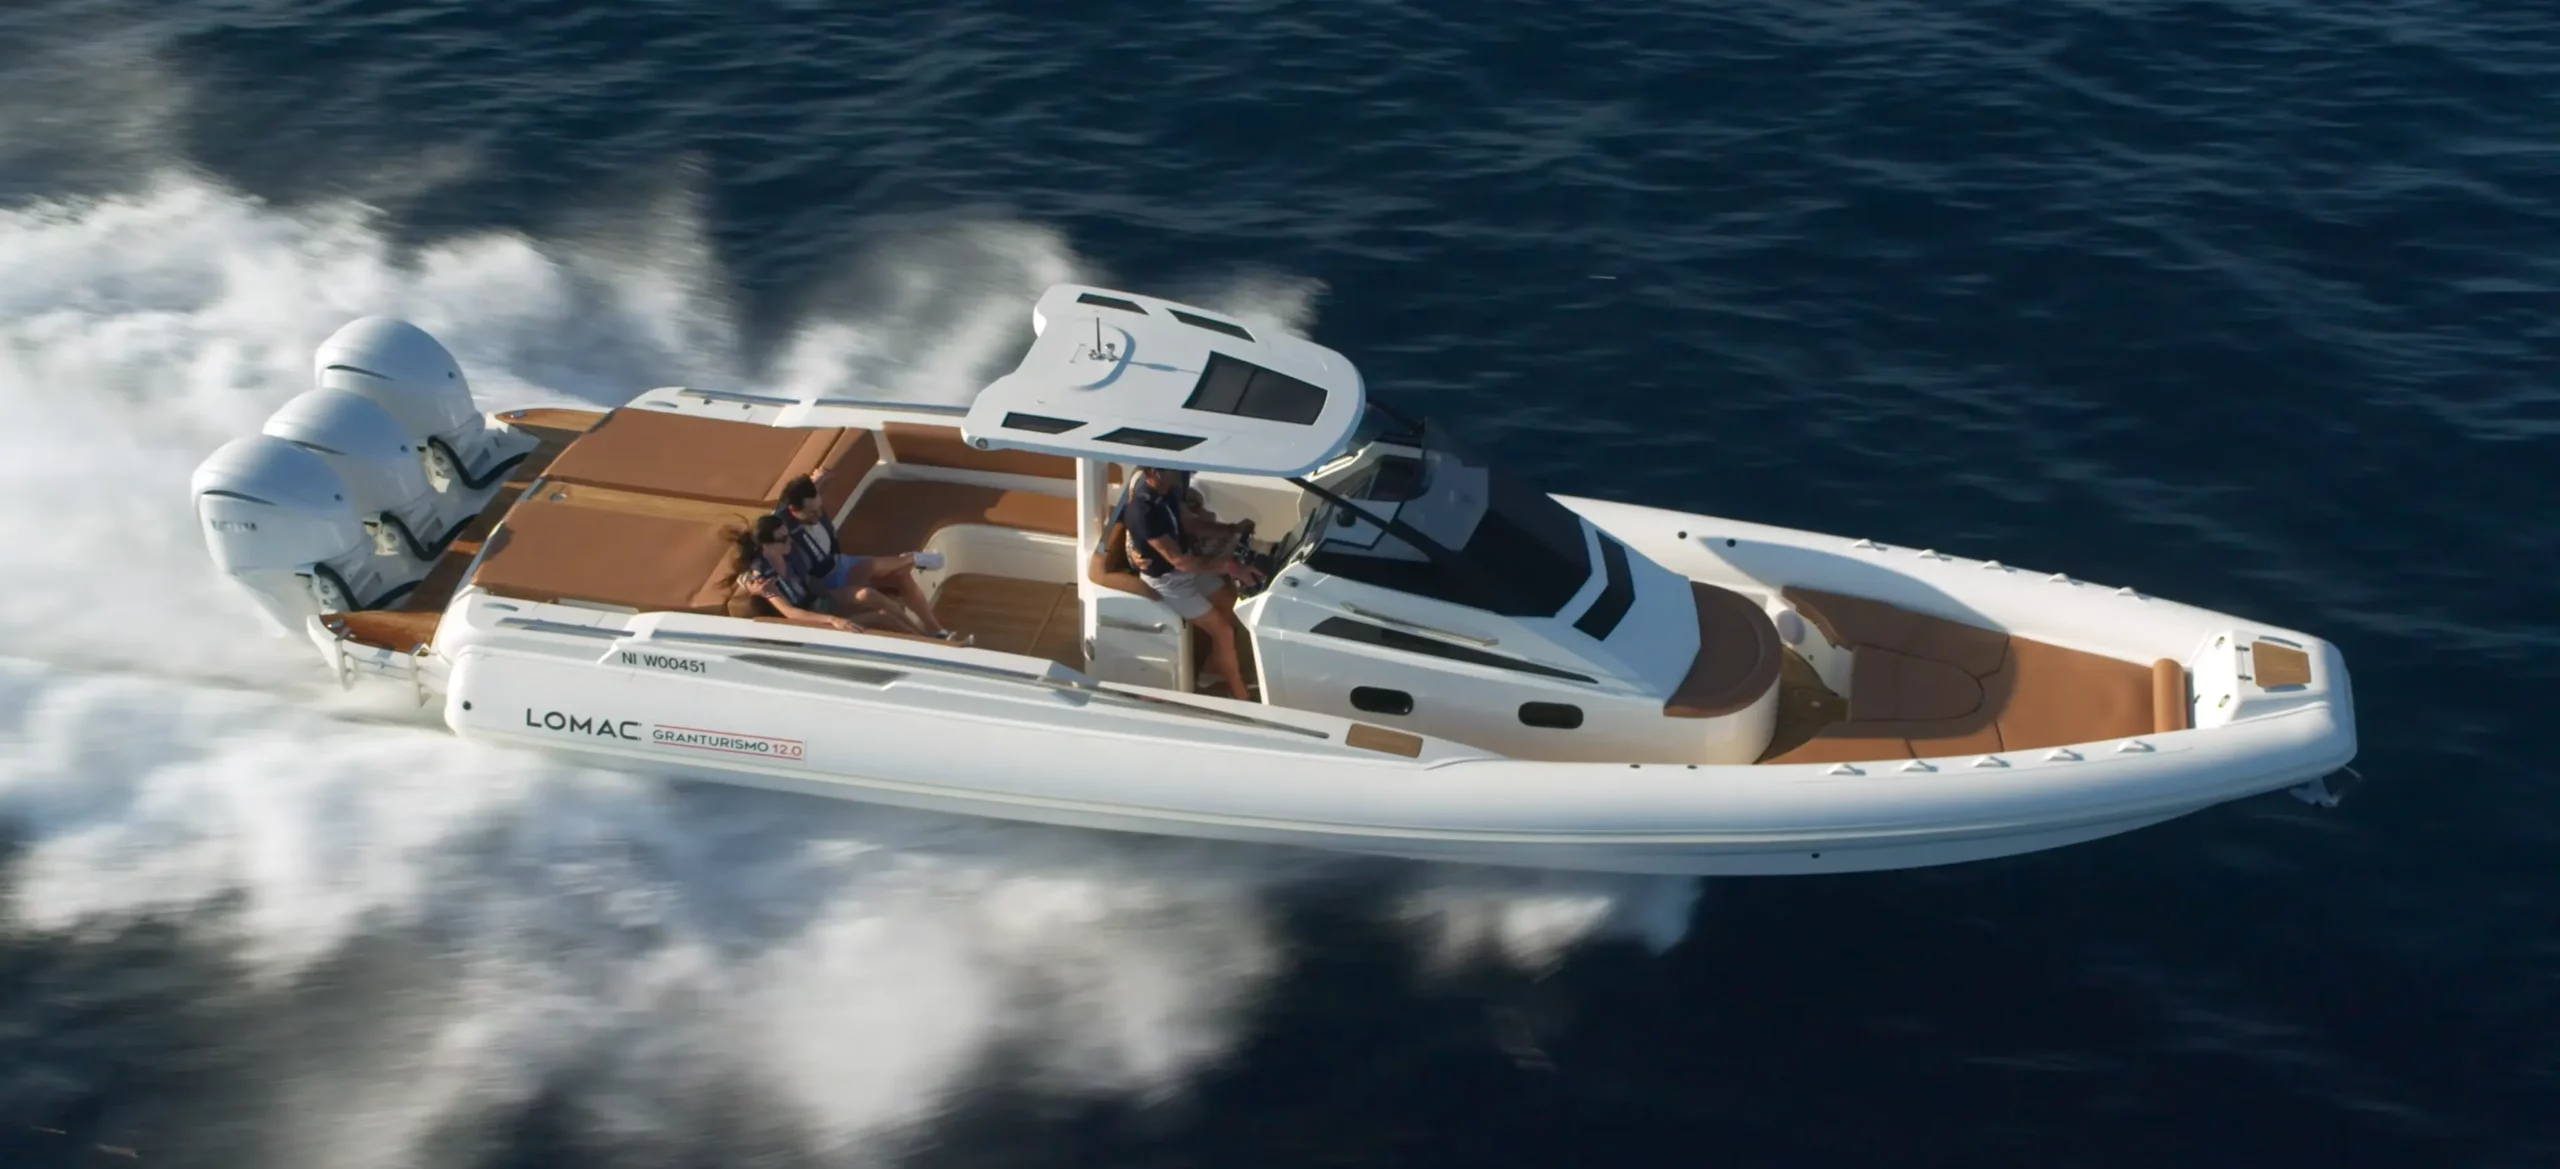 Beautiful Lomac Granturismo 12 RIB Yamaha Powered drone view @ RIBs ONLY - Home of the Rigid Inflatable Boat